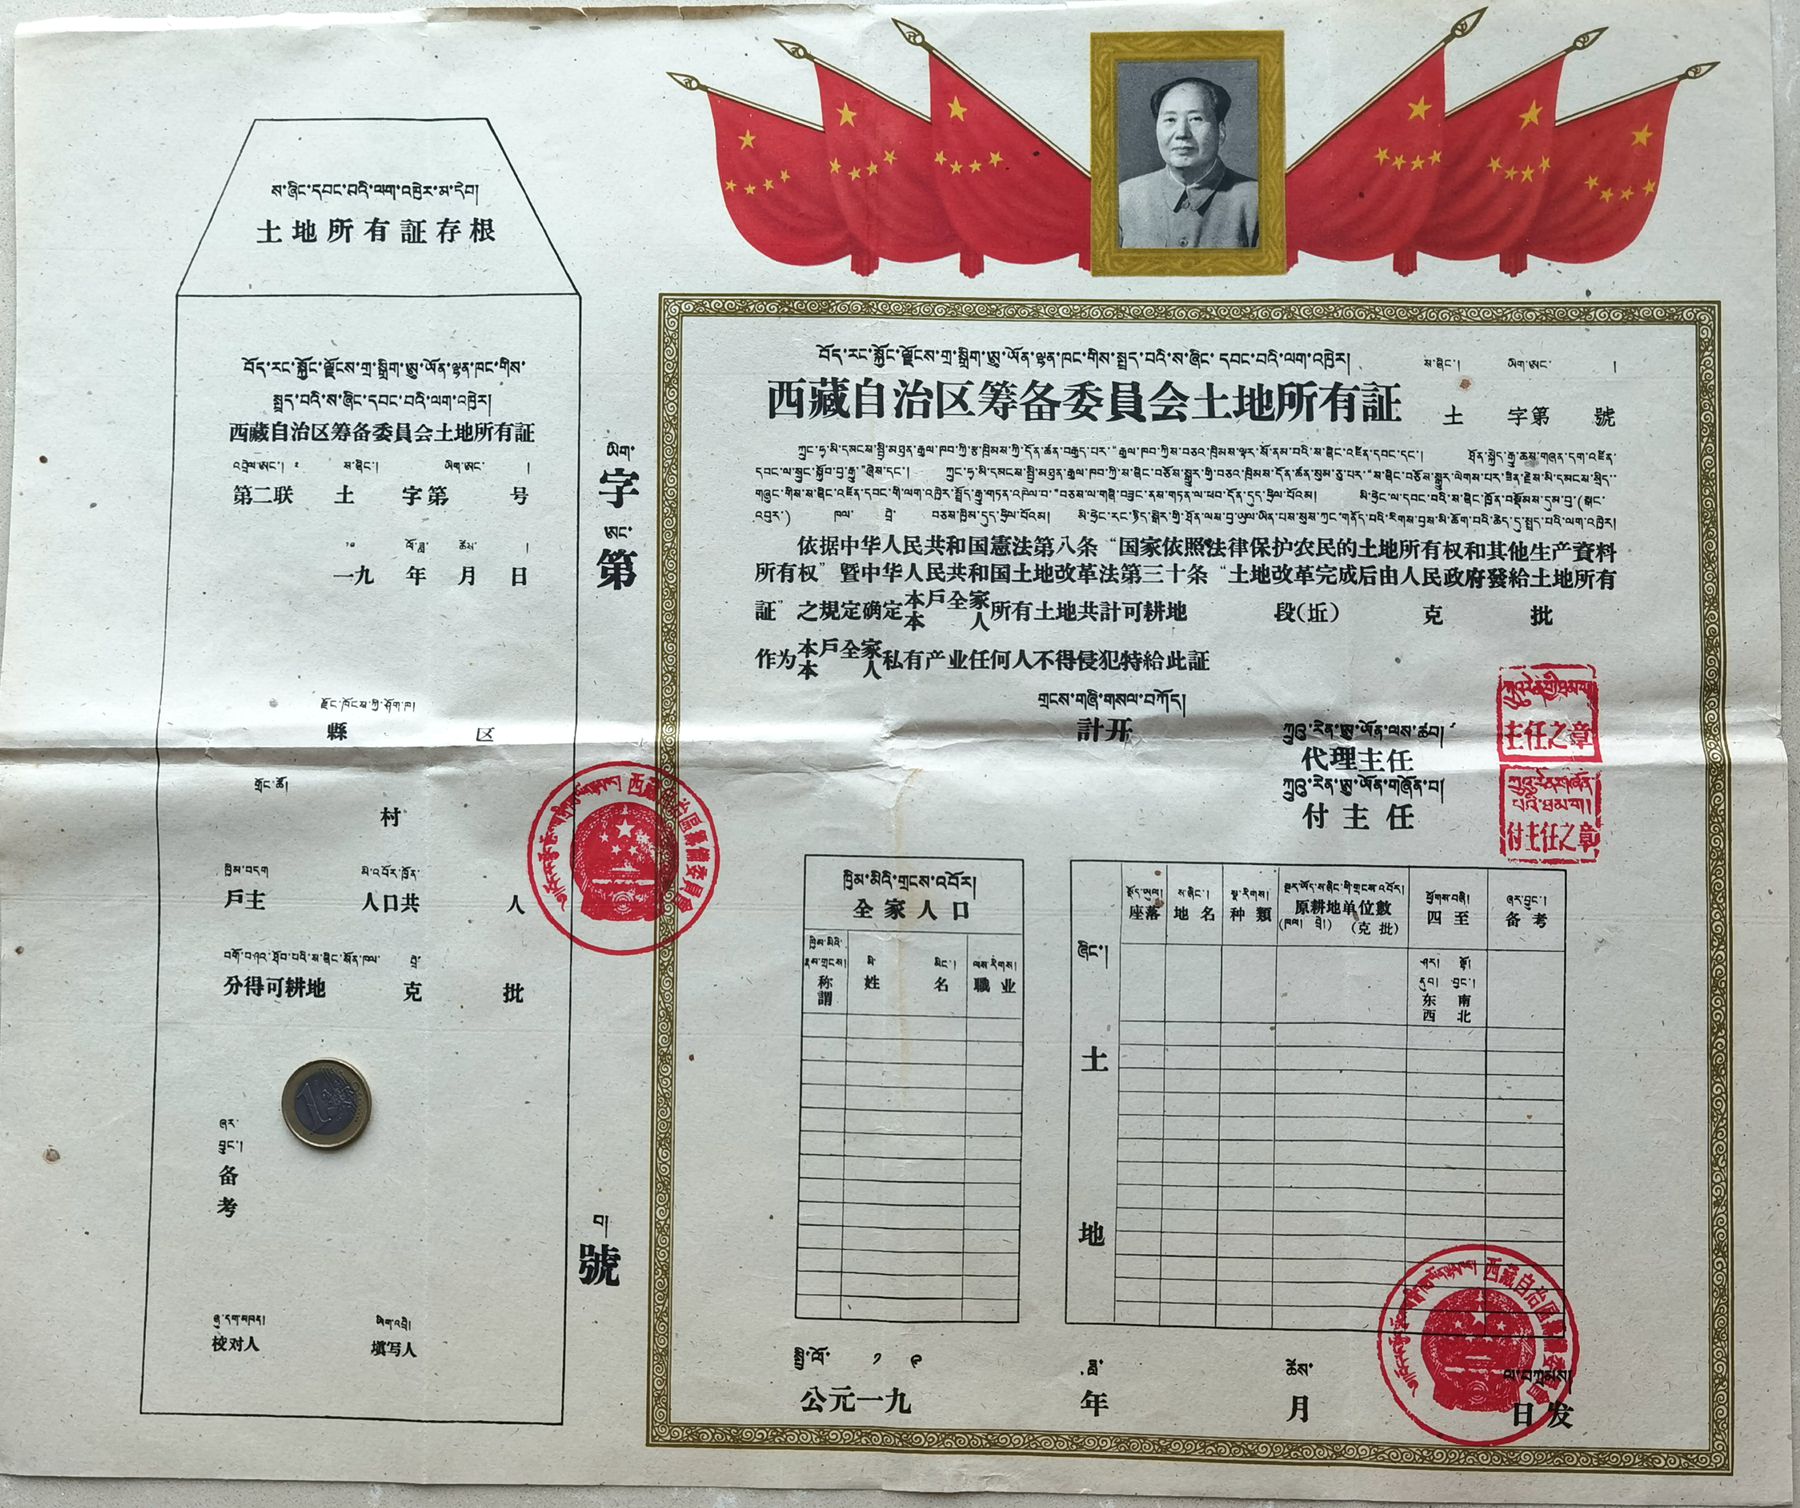 XZ830, Rare Tibet Land Deed, 1960's with Chairman Mao and Red Flag, Unused